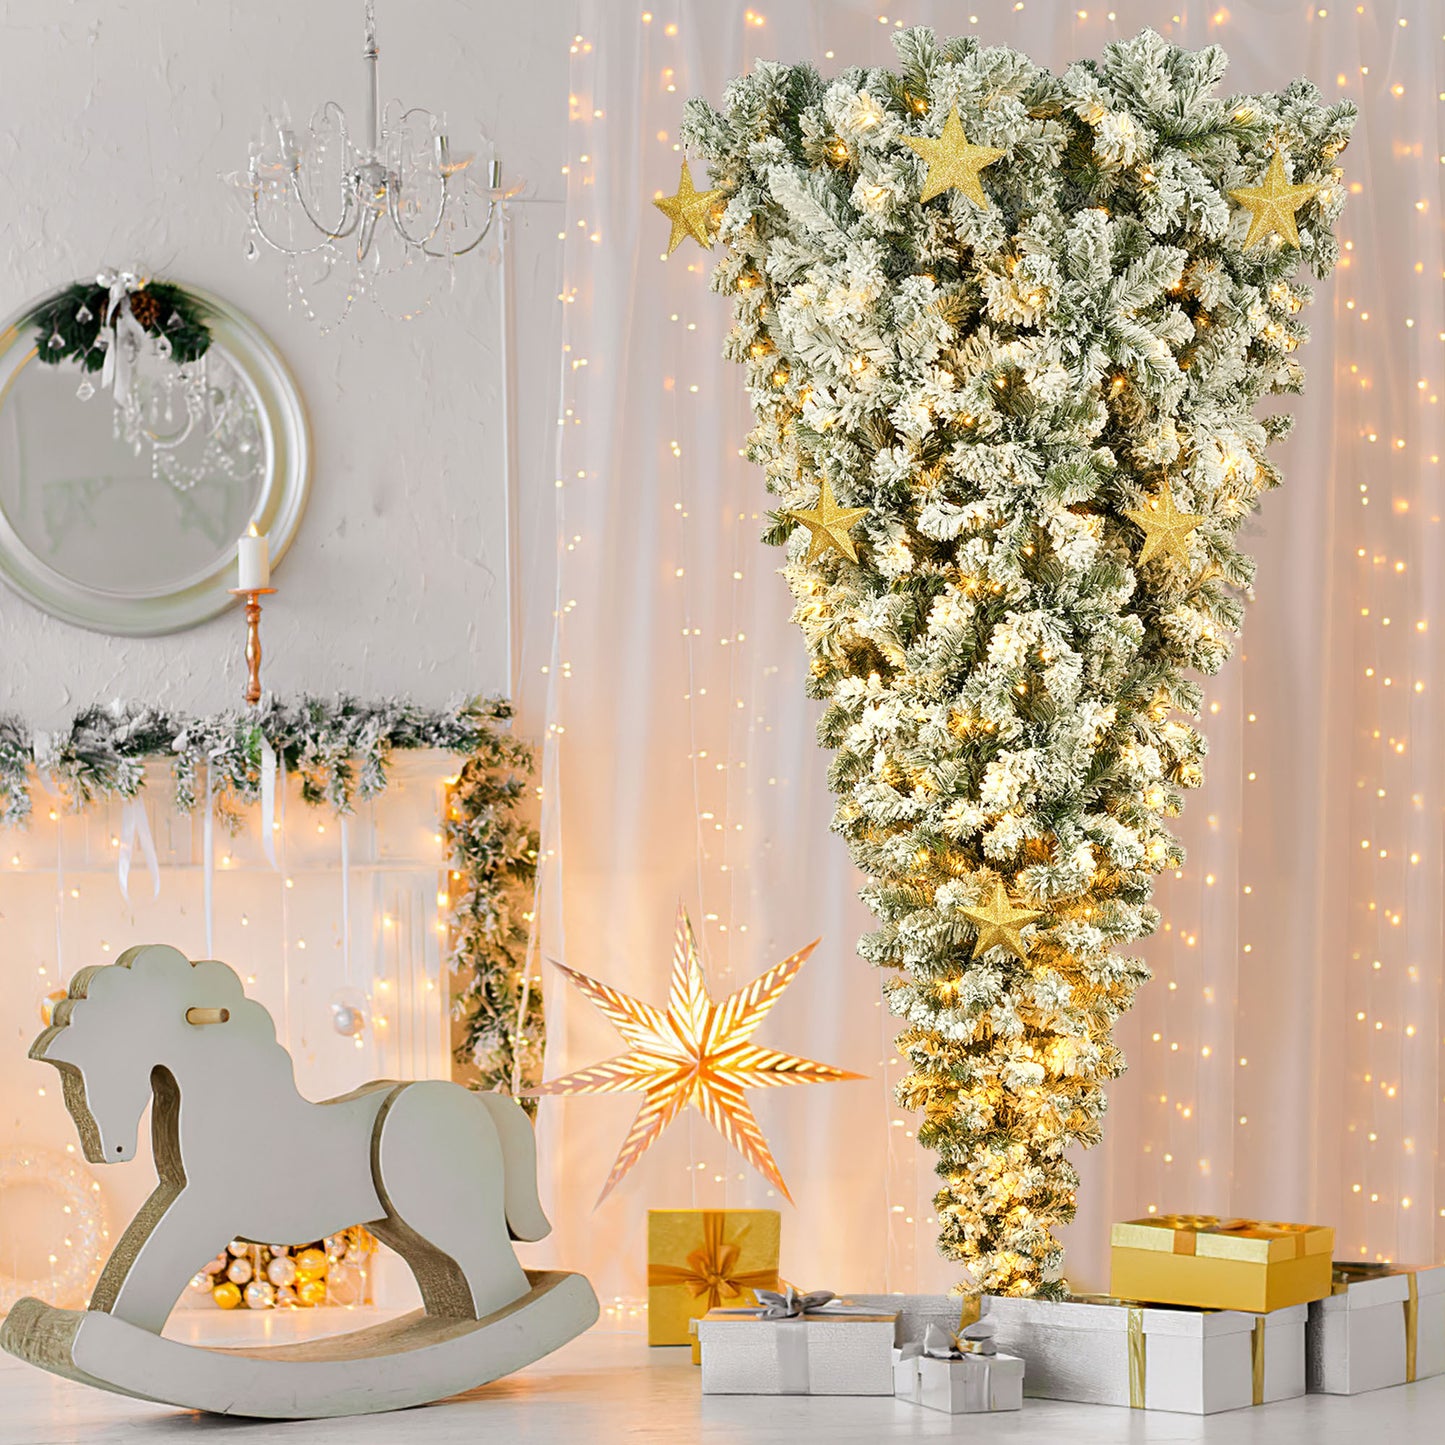 GO 6 FT Triangular Green PVC Christmas Tree with Warm LED Lights, White Flocking, and Golden Star Decorations